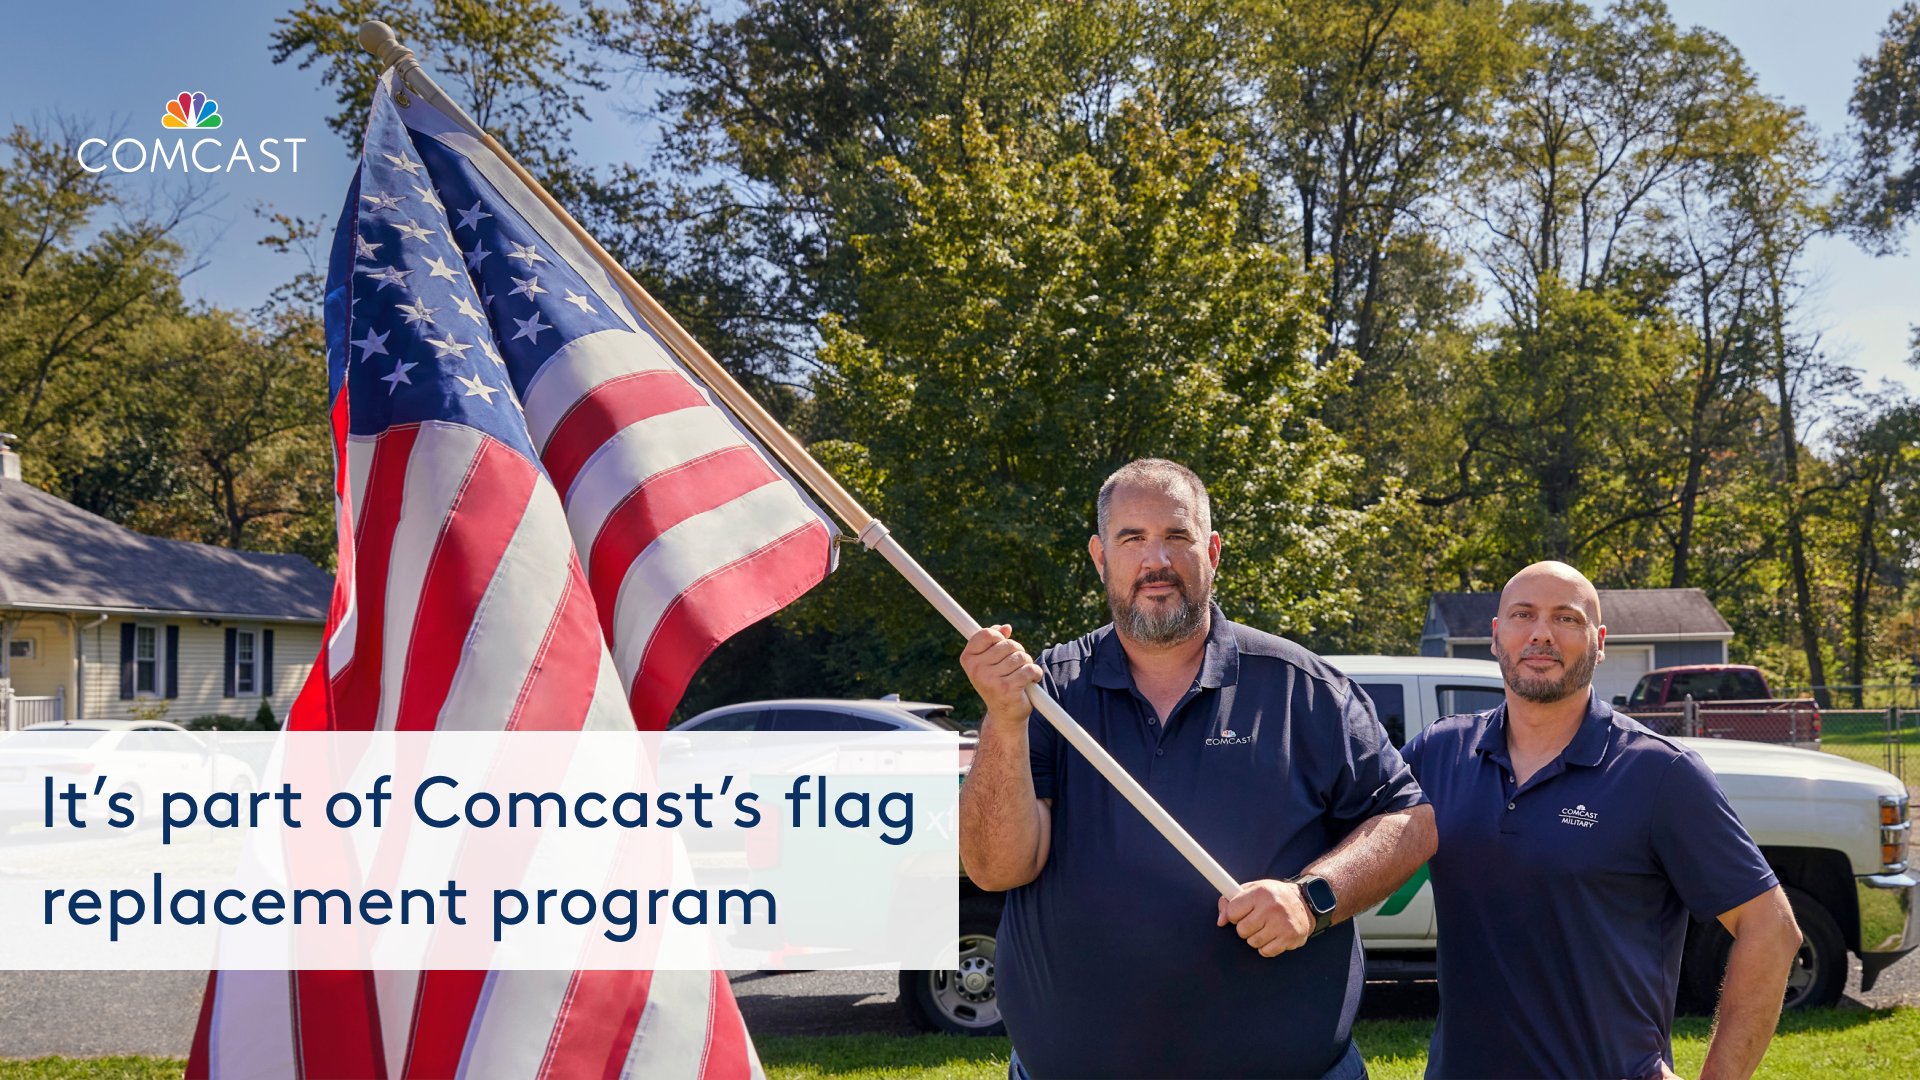 Are You Eligible for Comcast's Internet Essentials? - One United Lancaster